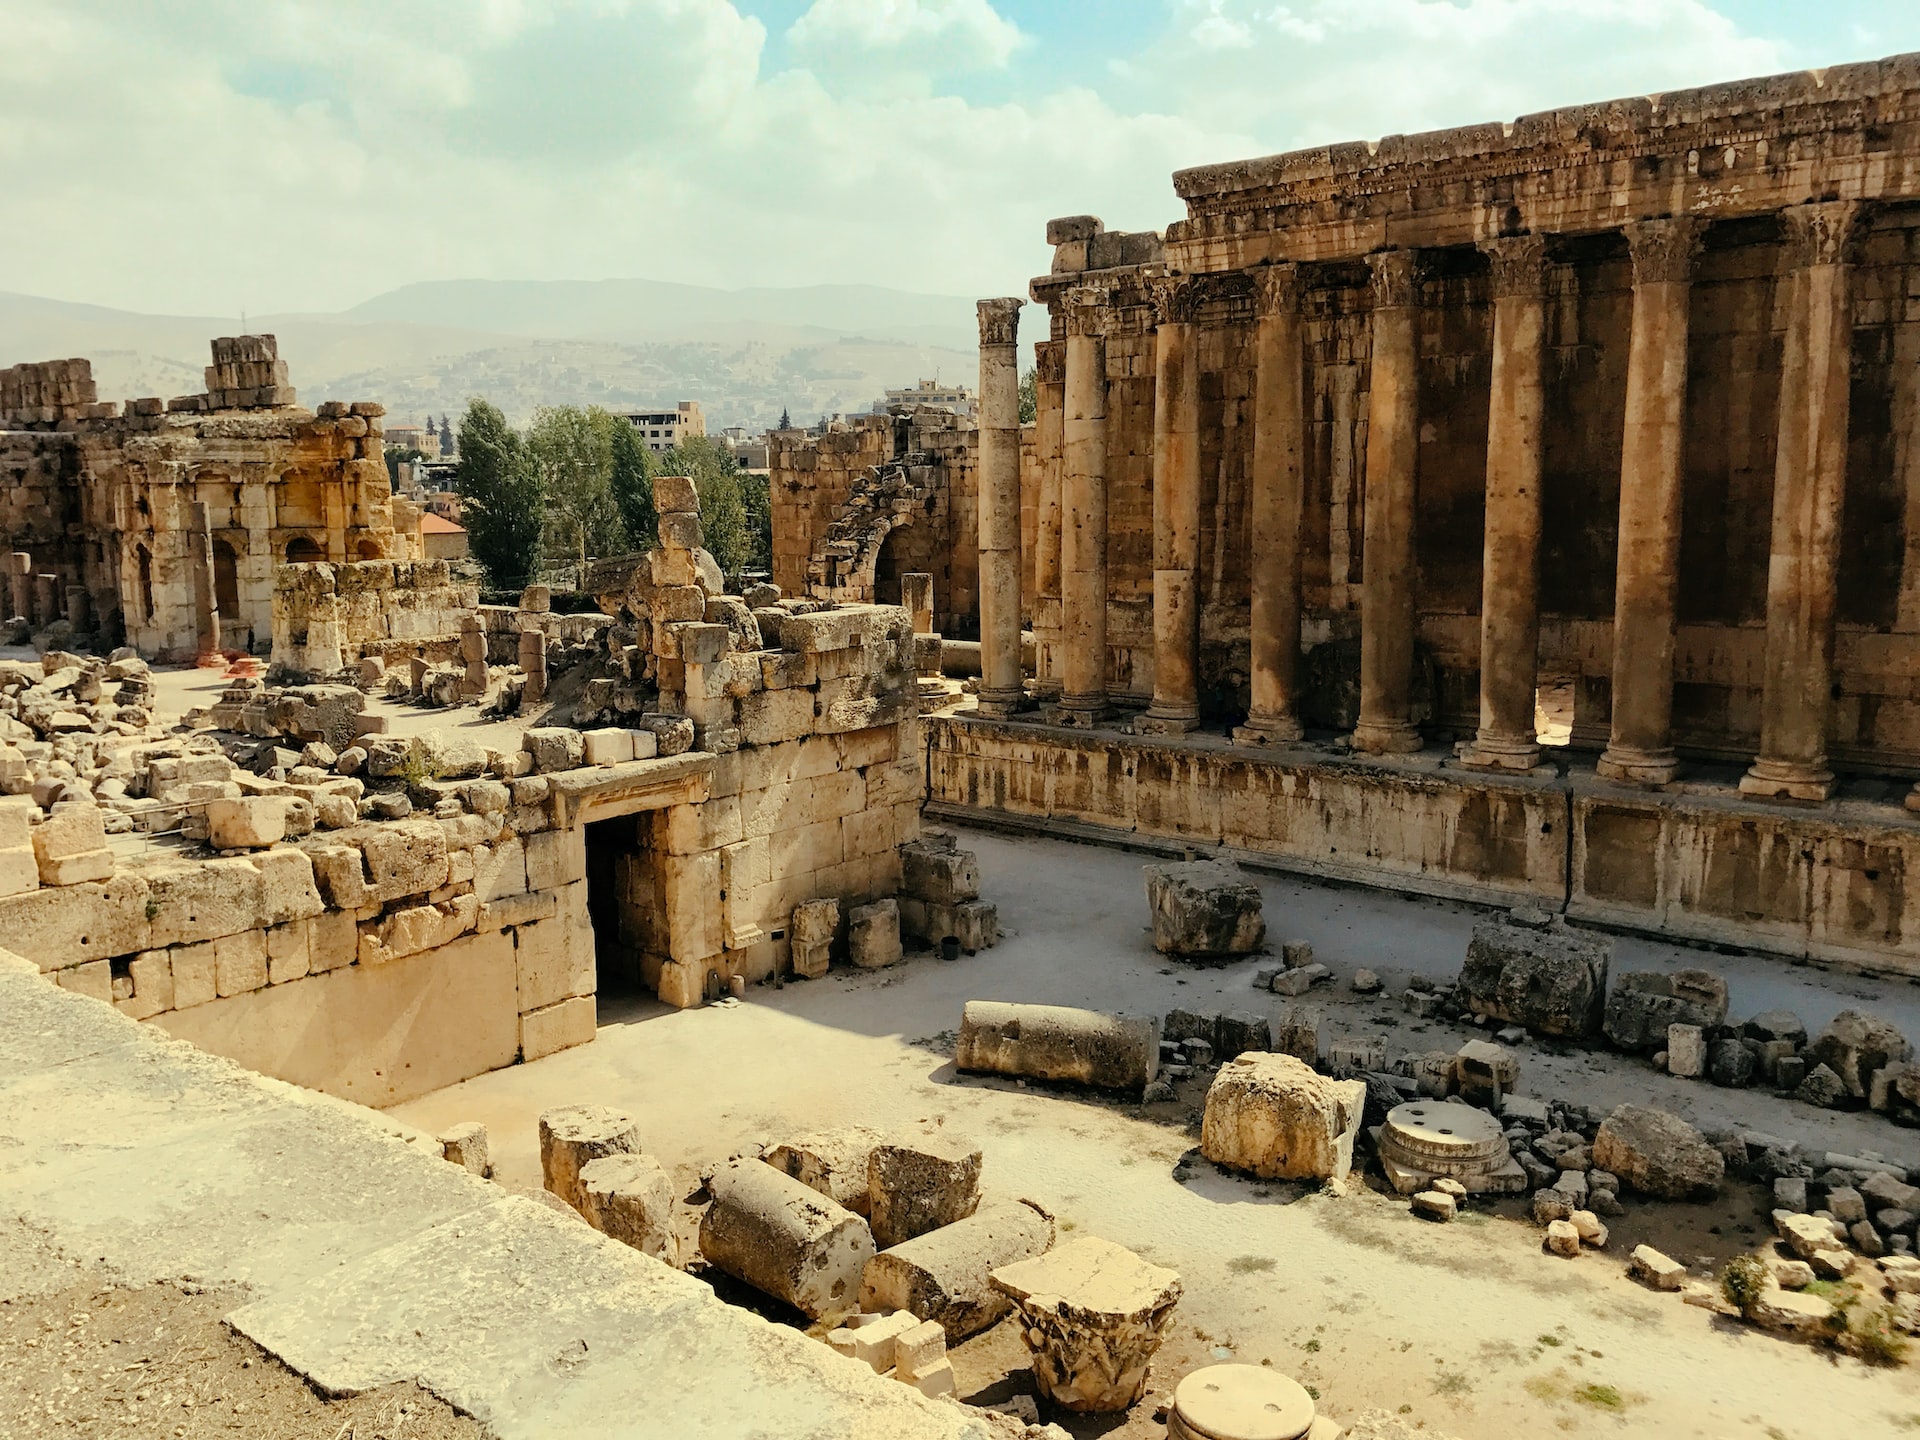 A photo of the impressive ruins of Baalbek, including the Temple of Jupiter, the Temple of Bacchus, and the Temple of Venus, showcasing the Roman Empire's architectural prowess.